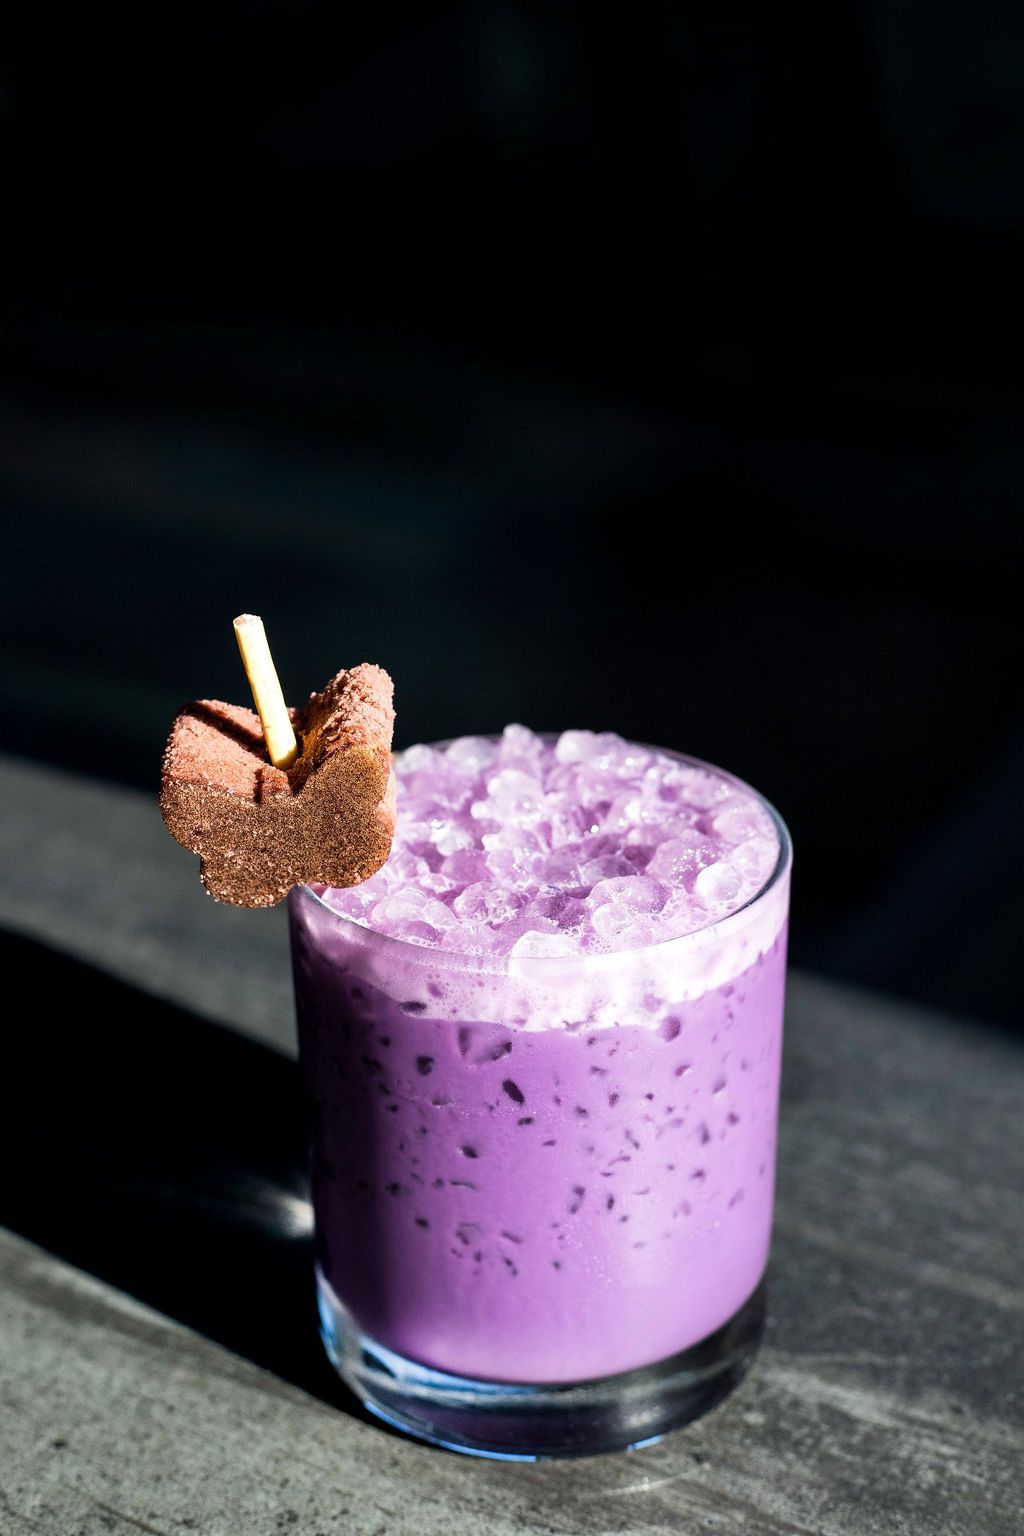 A glass filled crushed ice and a lavender ube-colored coctail, garnished with a butterfly-shaped sponge cake on a Pocky stick.